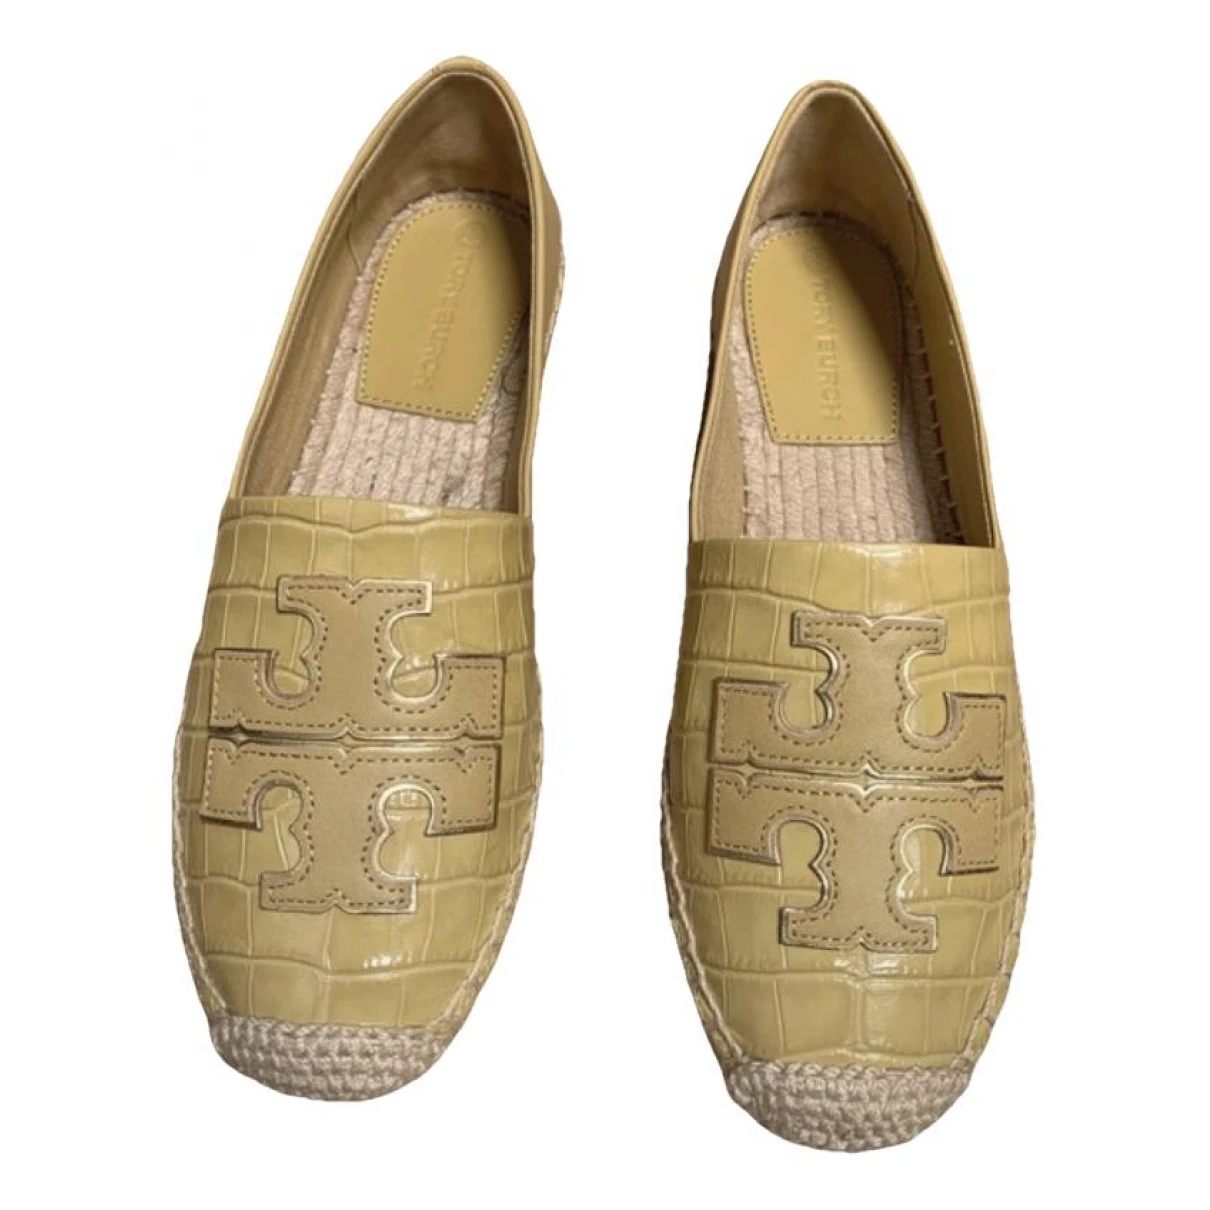 shoes Tory Burch espadrilles for Female Leather 37.5 EU. Used condition